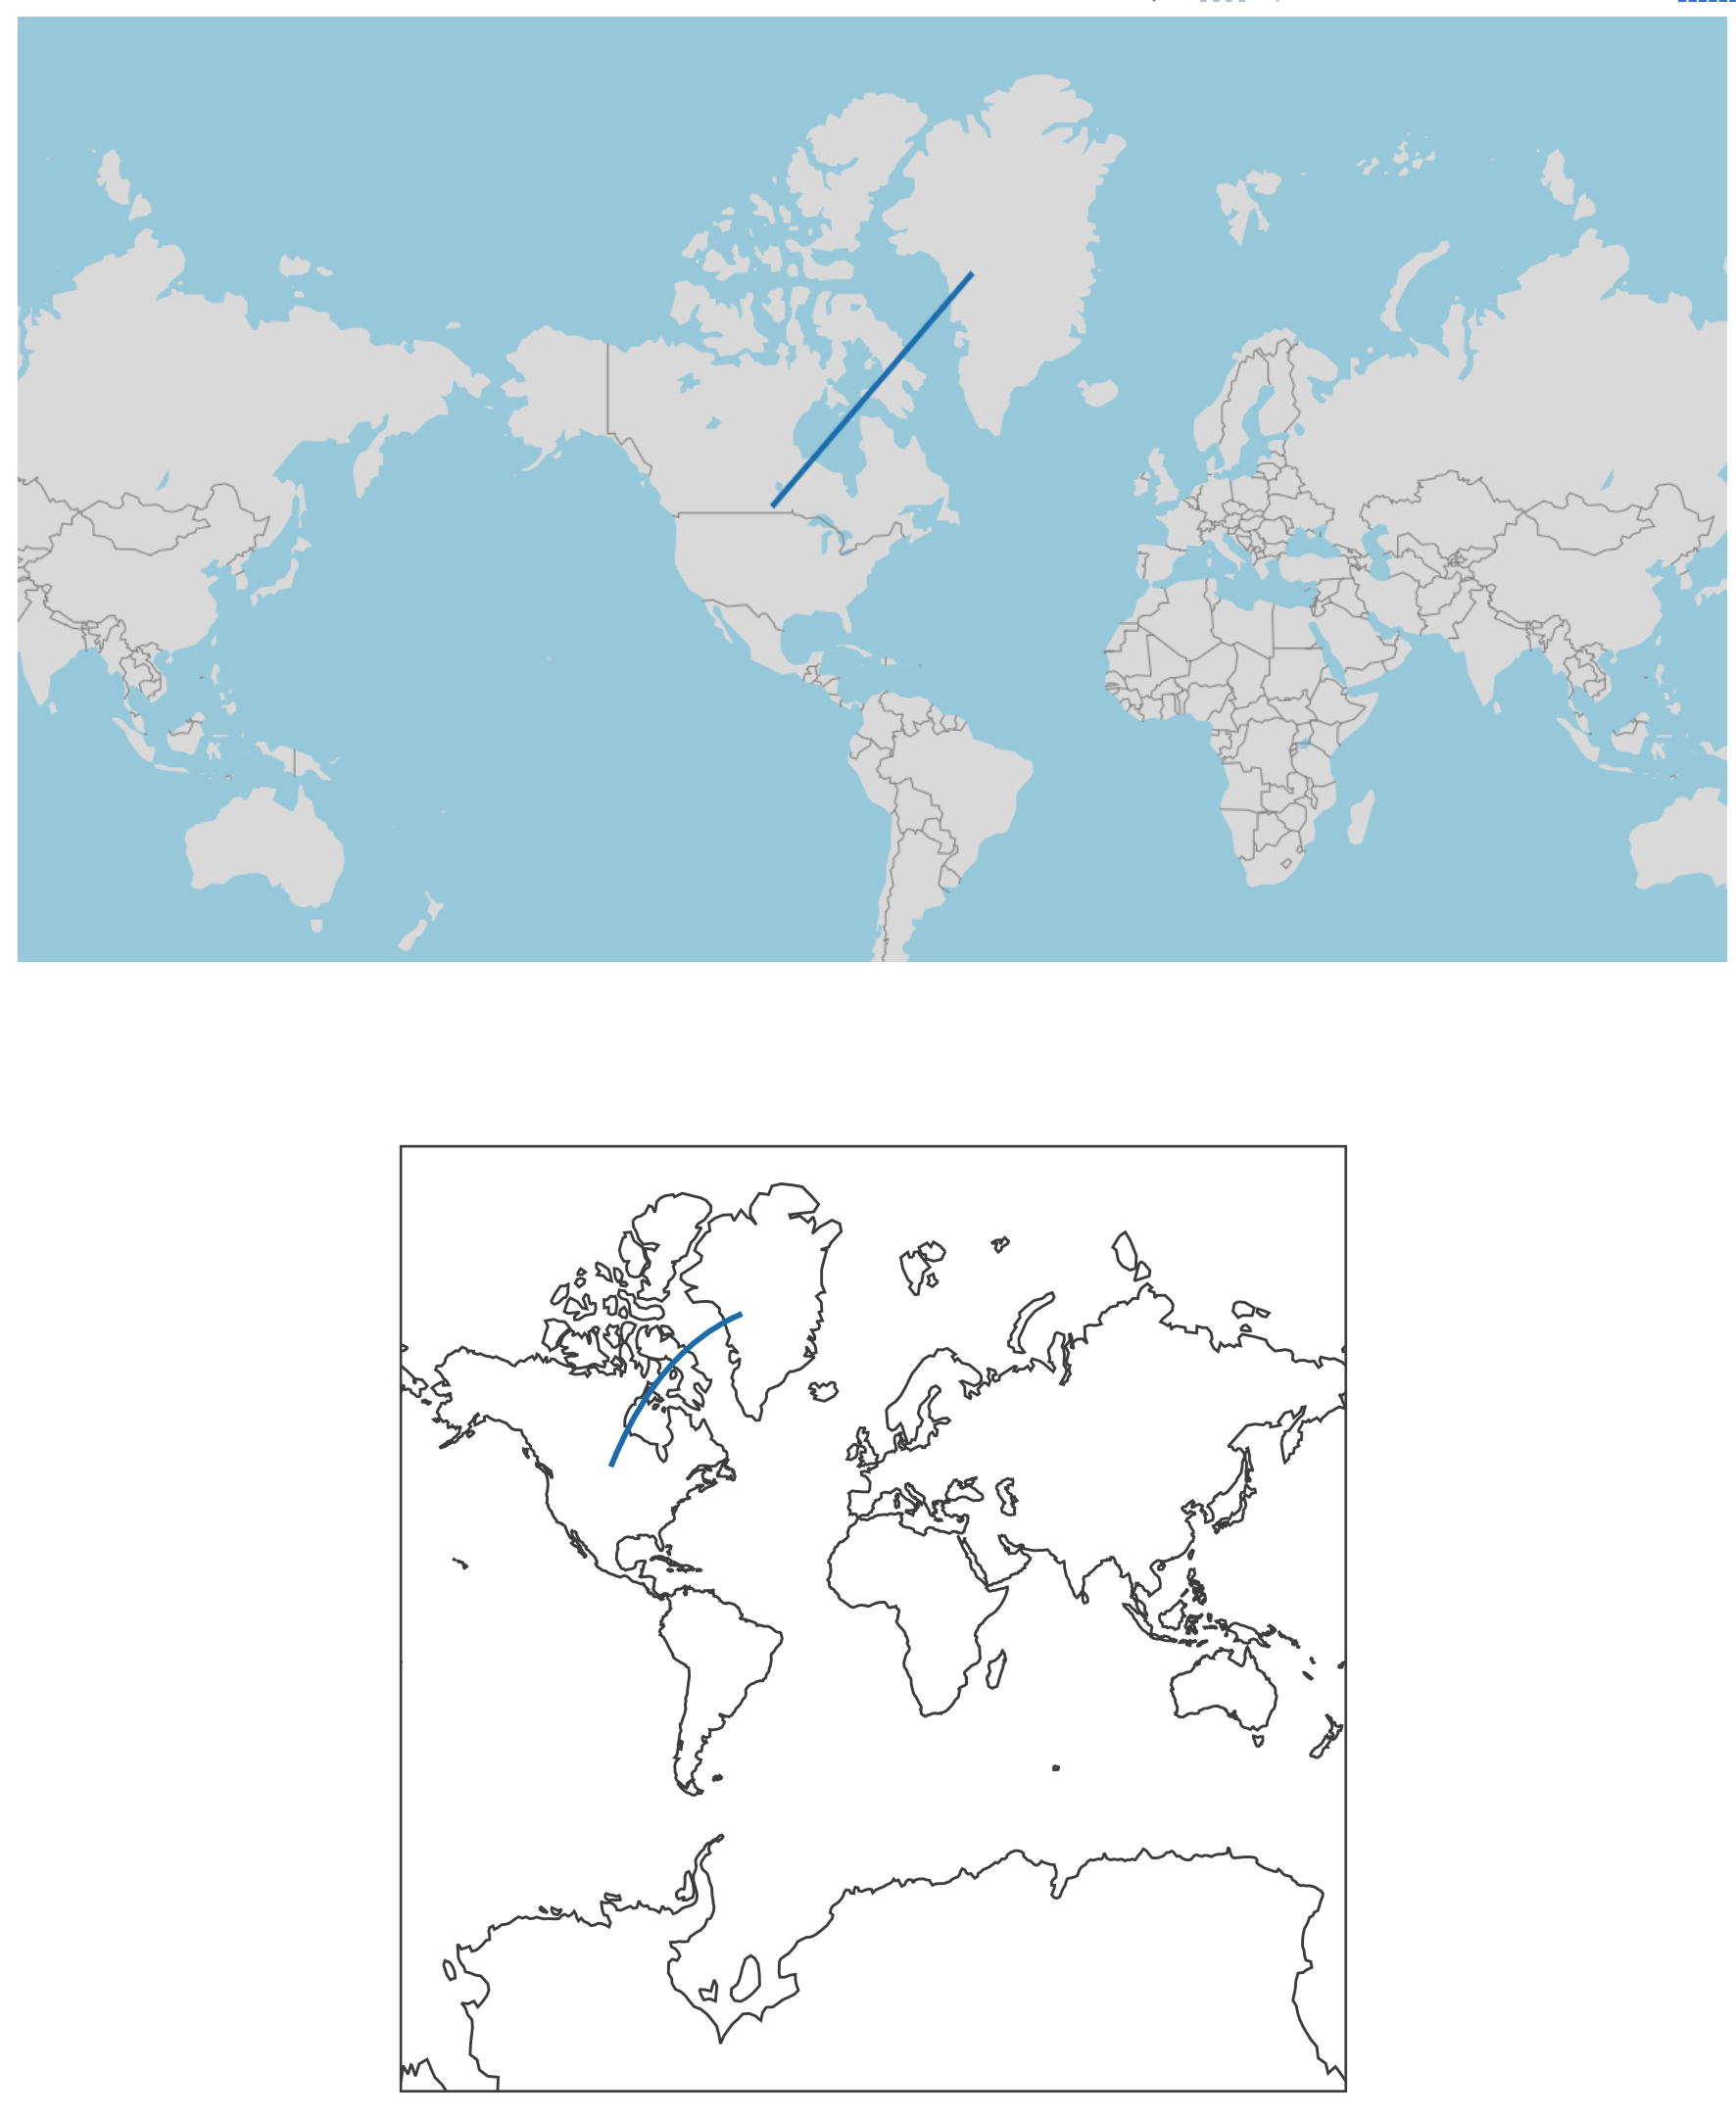 A comparison of plotly’s integrated mapping solutions: plot_mapbox() (top) and plot_geo() (bottom). The plot_geo() approach will transform line segments to correctly reflect their projection into a non-cartesian coordinate system.